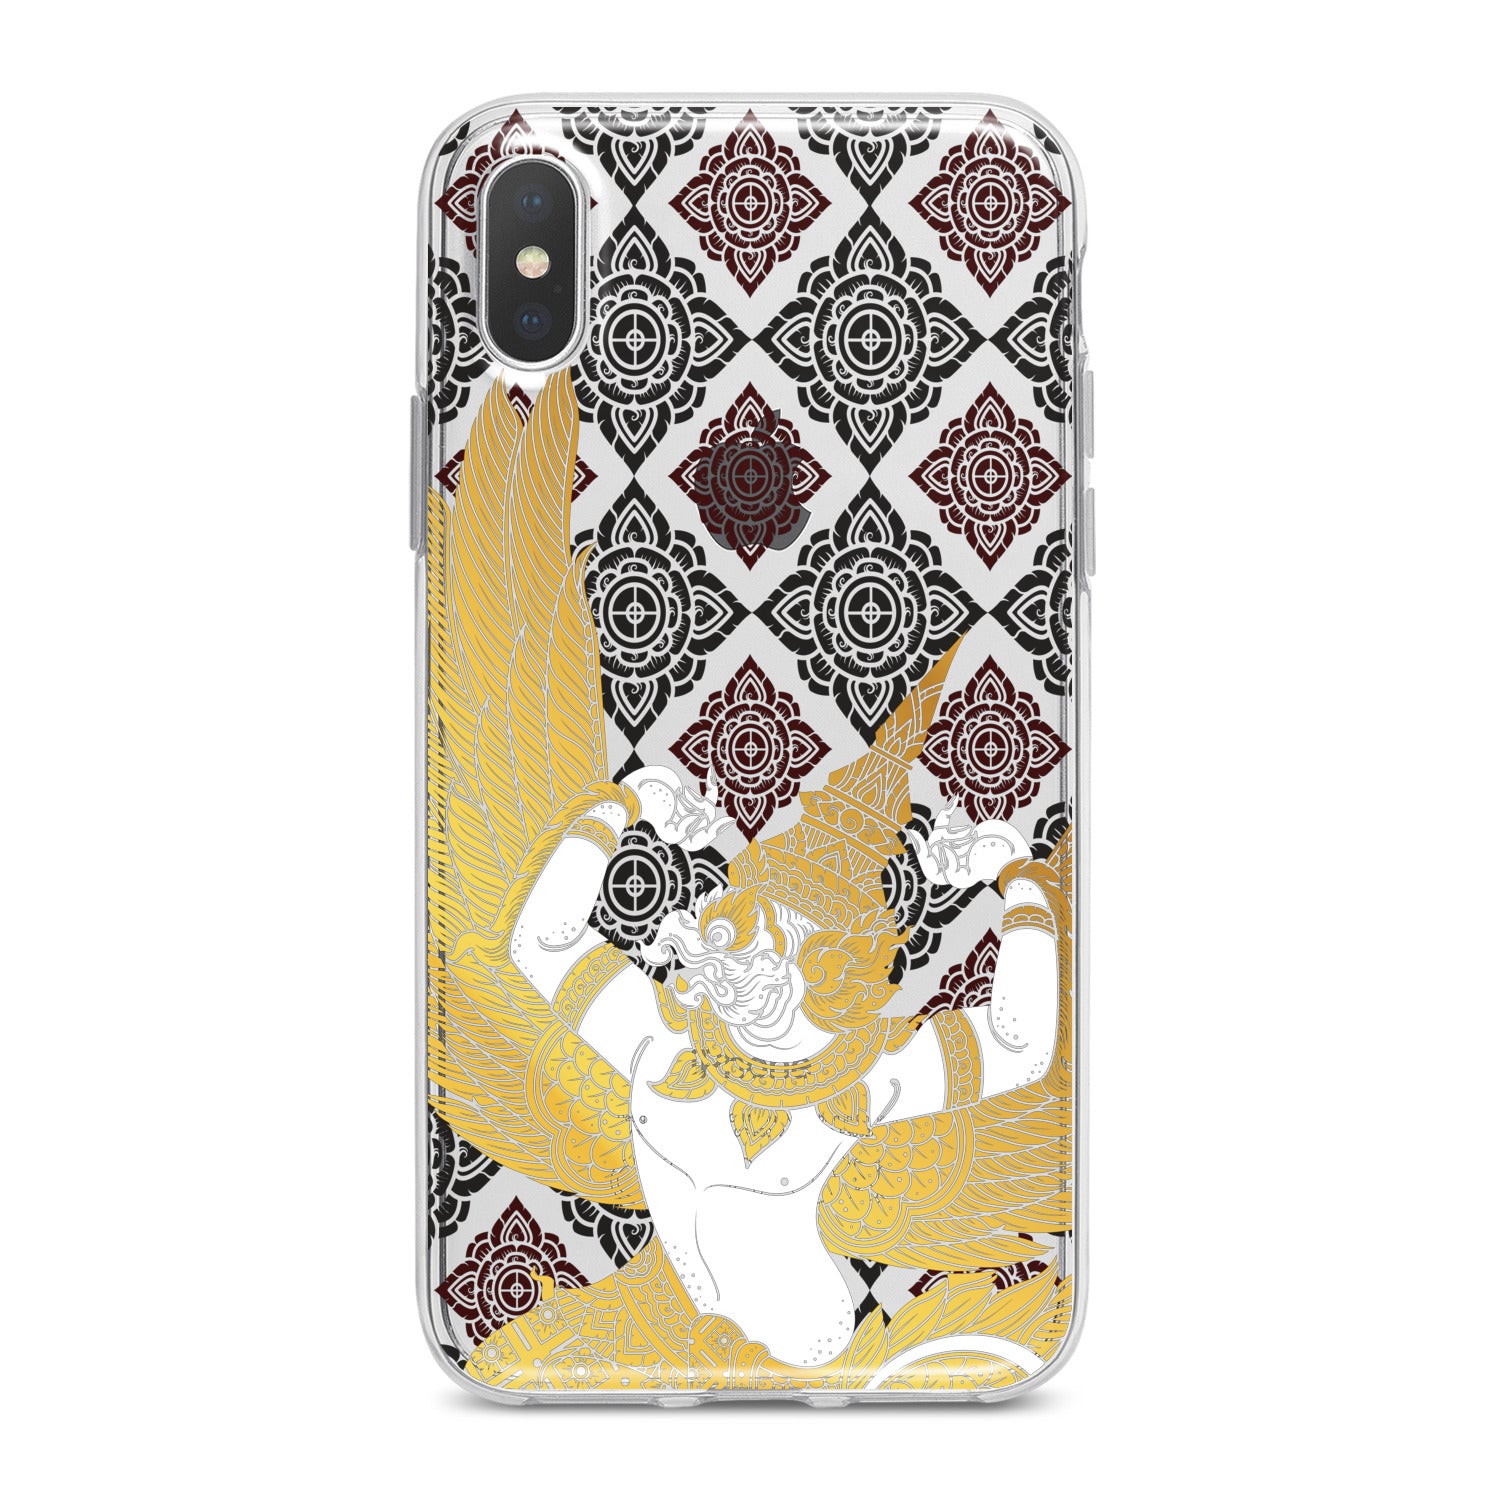 Lex Altern Garuda Art Phone Case for your iPhone & Android phone.